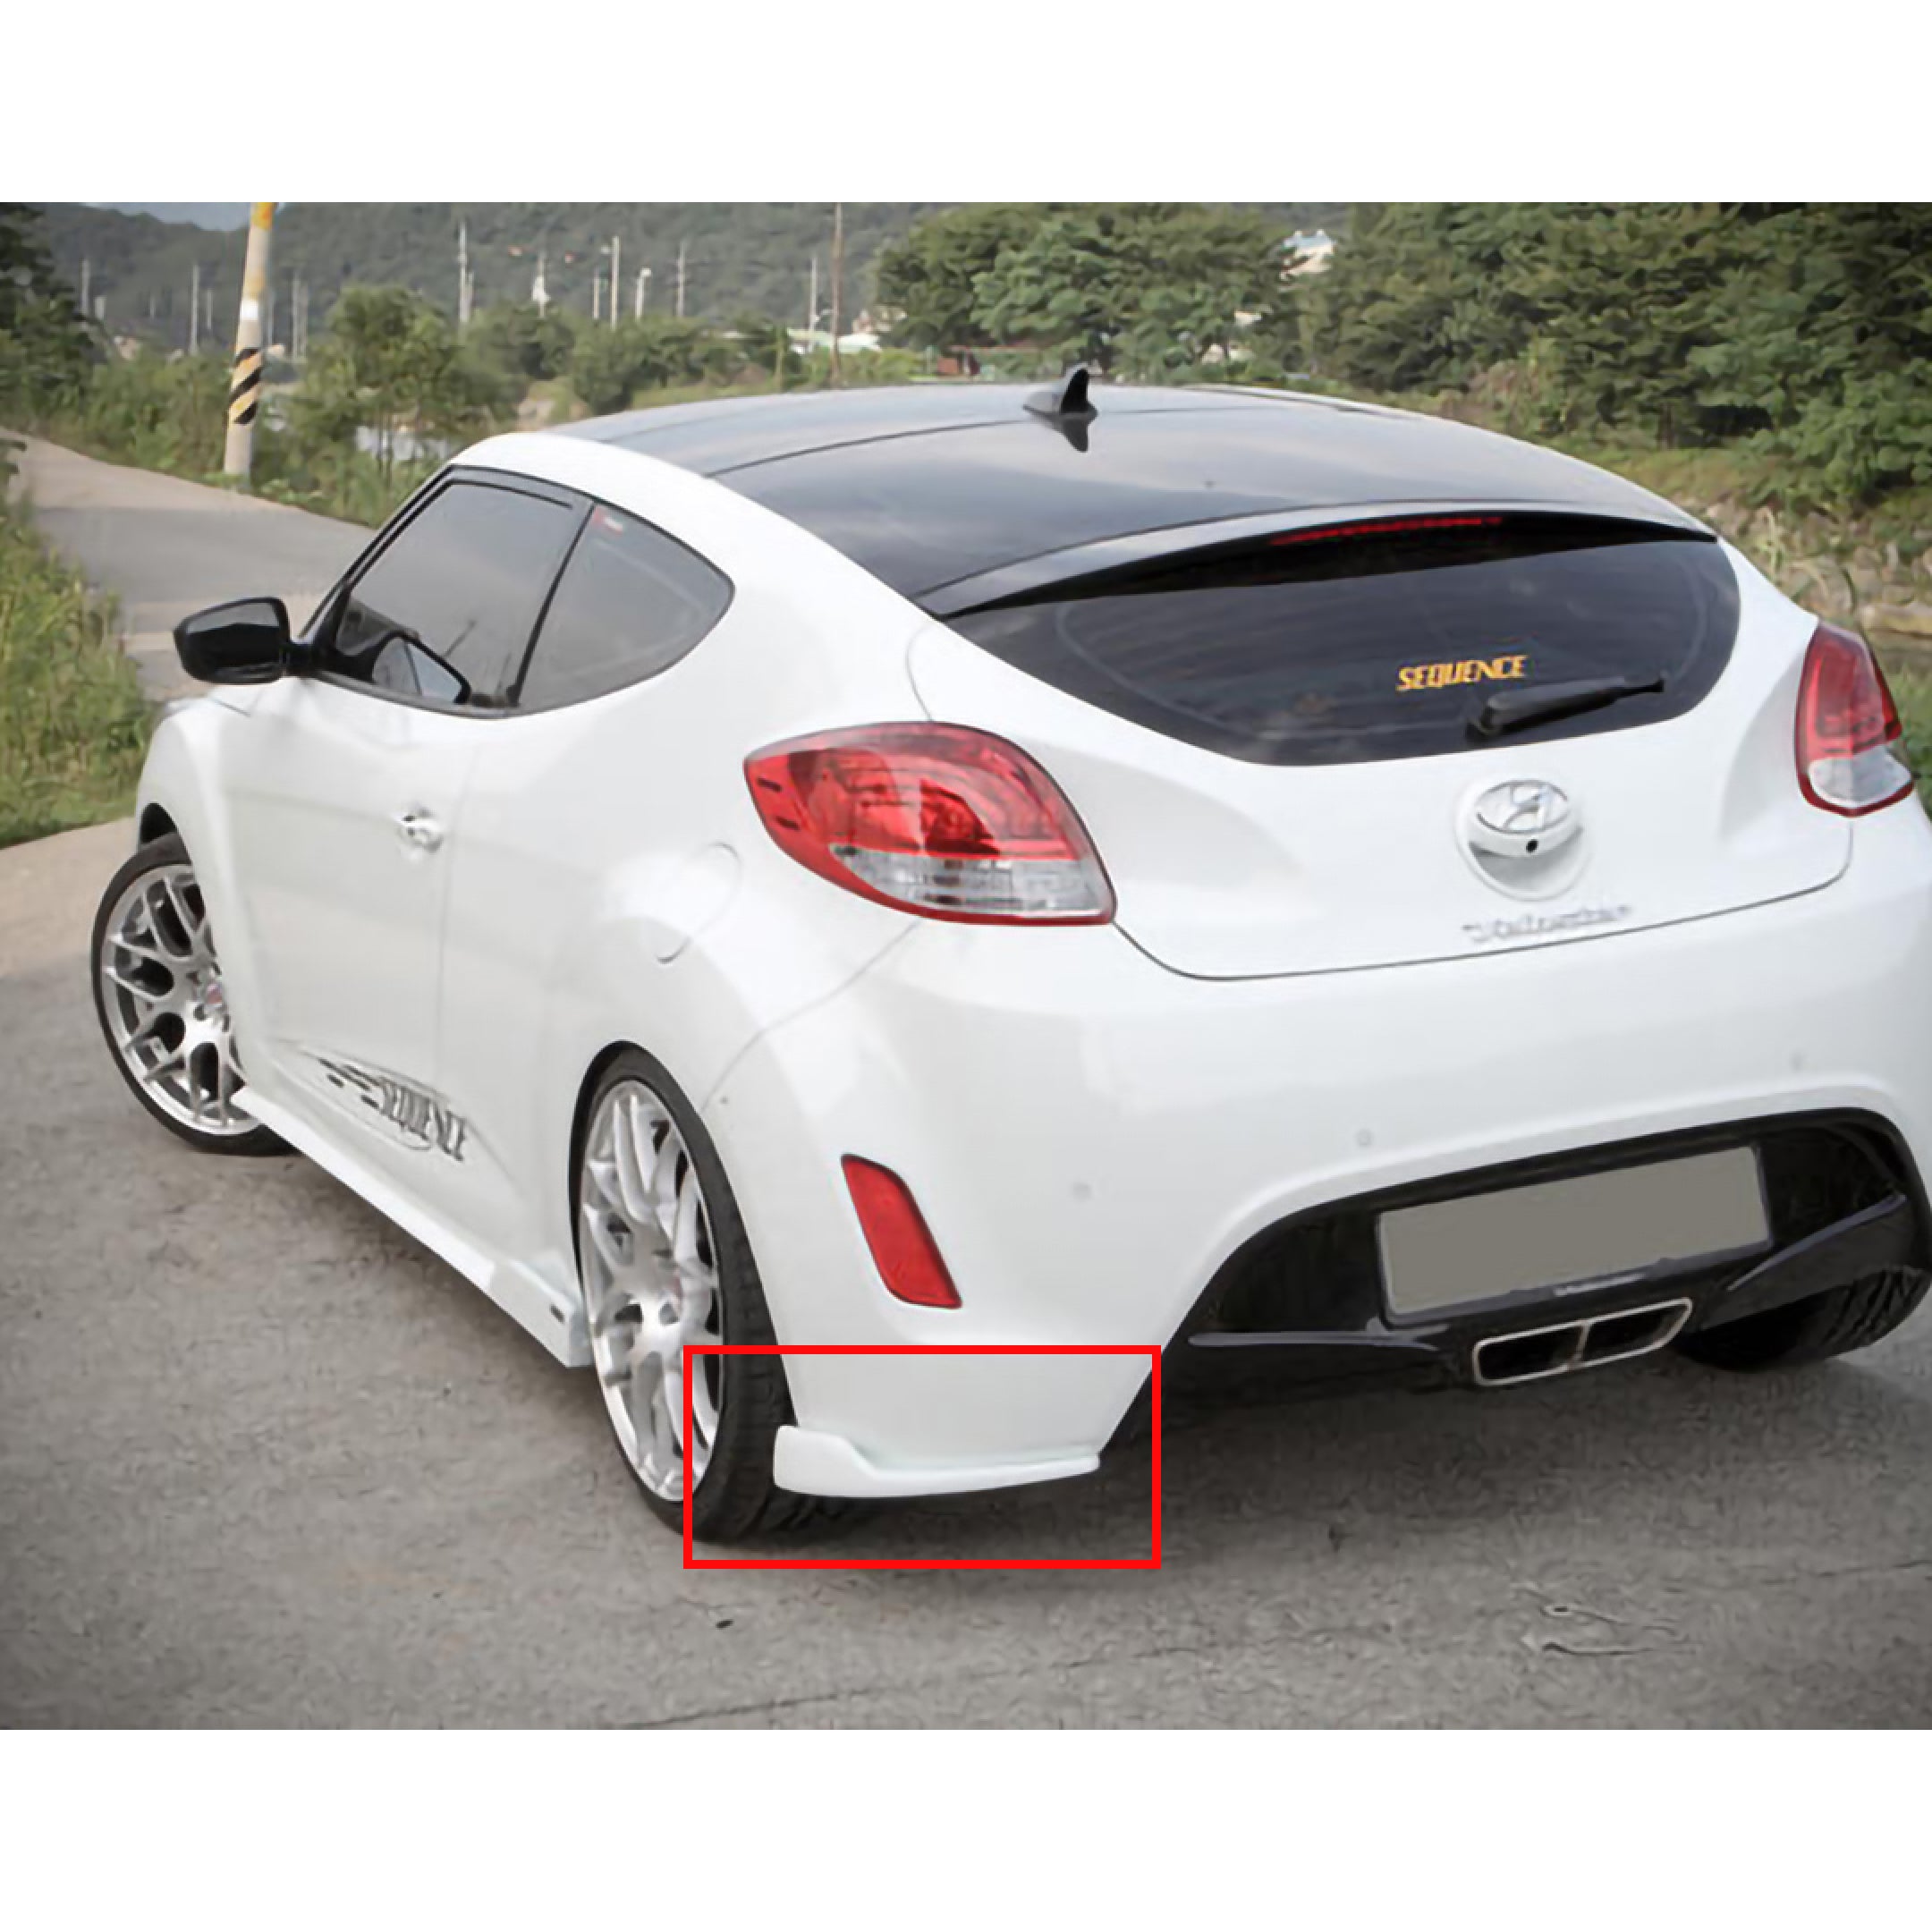 For Hyundai Veloster 2012-2017 OE Style Rear Bumper Corner Chins Splitters Body Kit (Unpainted Matted Black) - 0